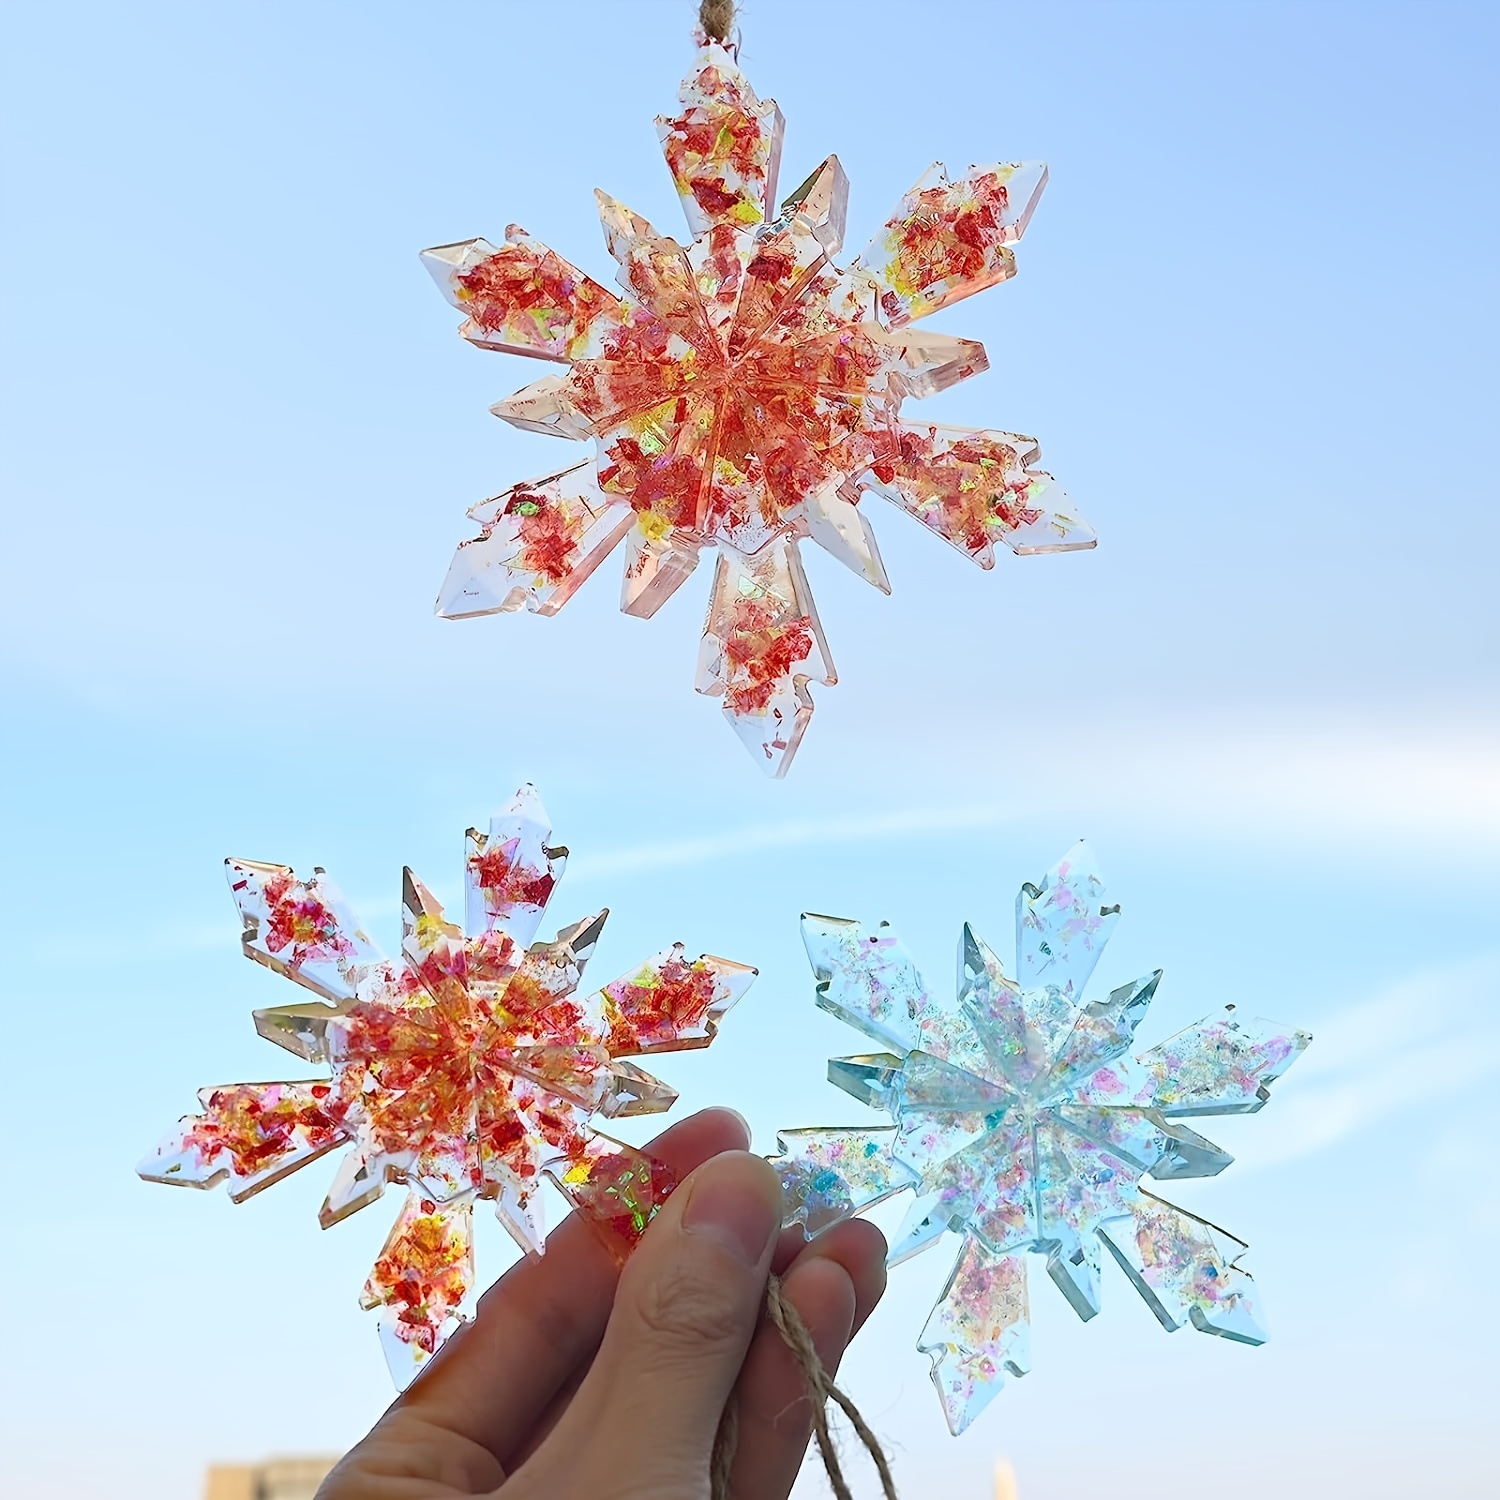 Best Deal for 10 Pair Christmas Resin Molds Snowflake Mold